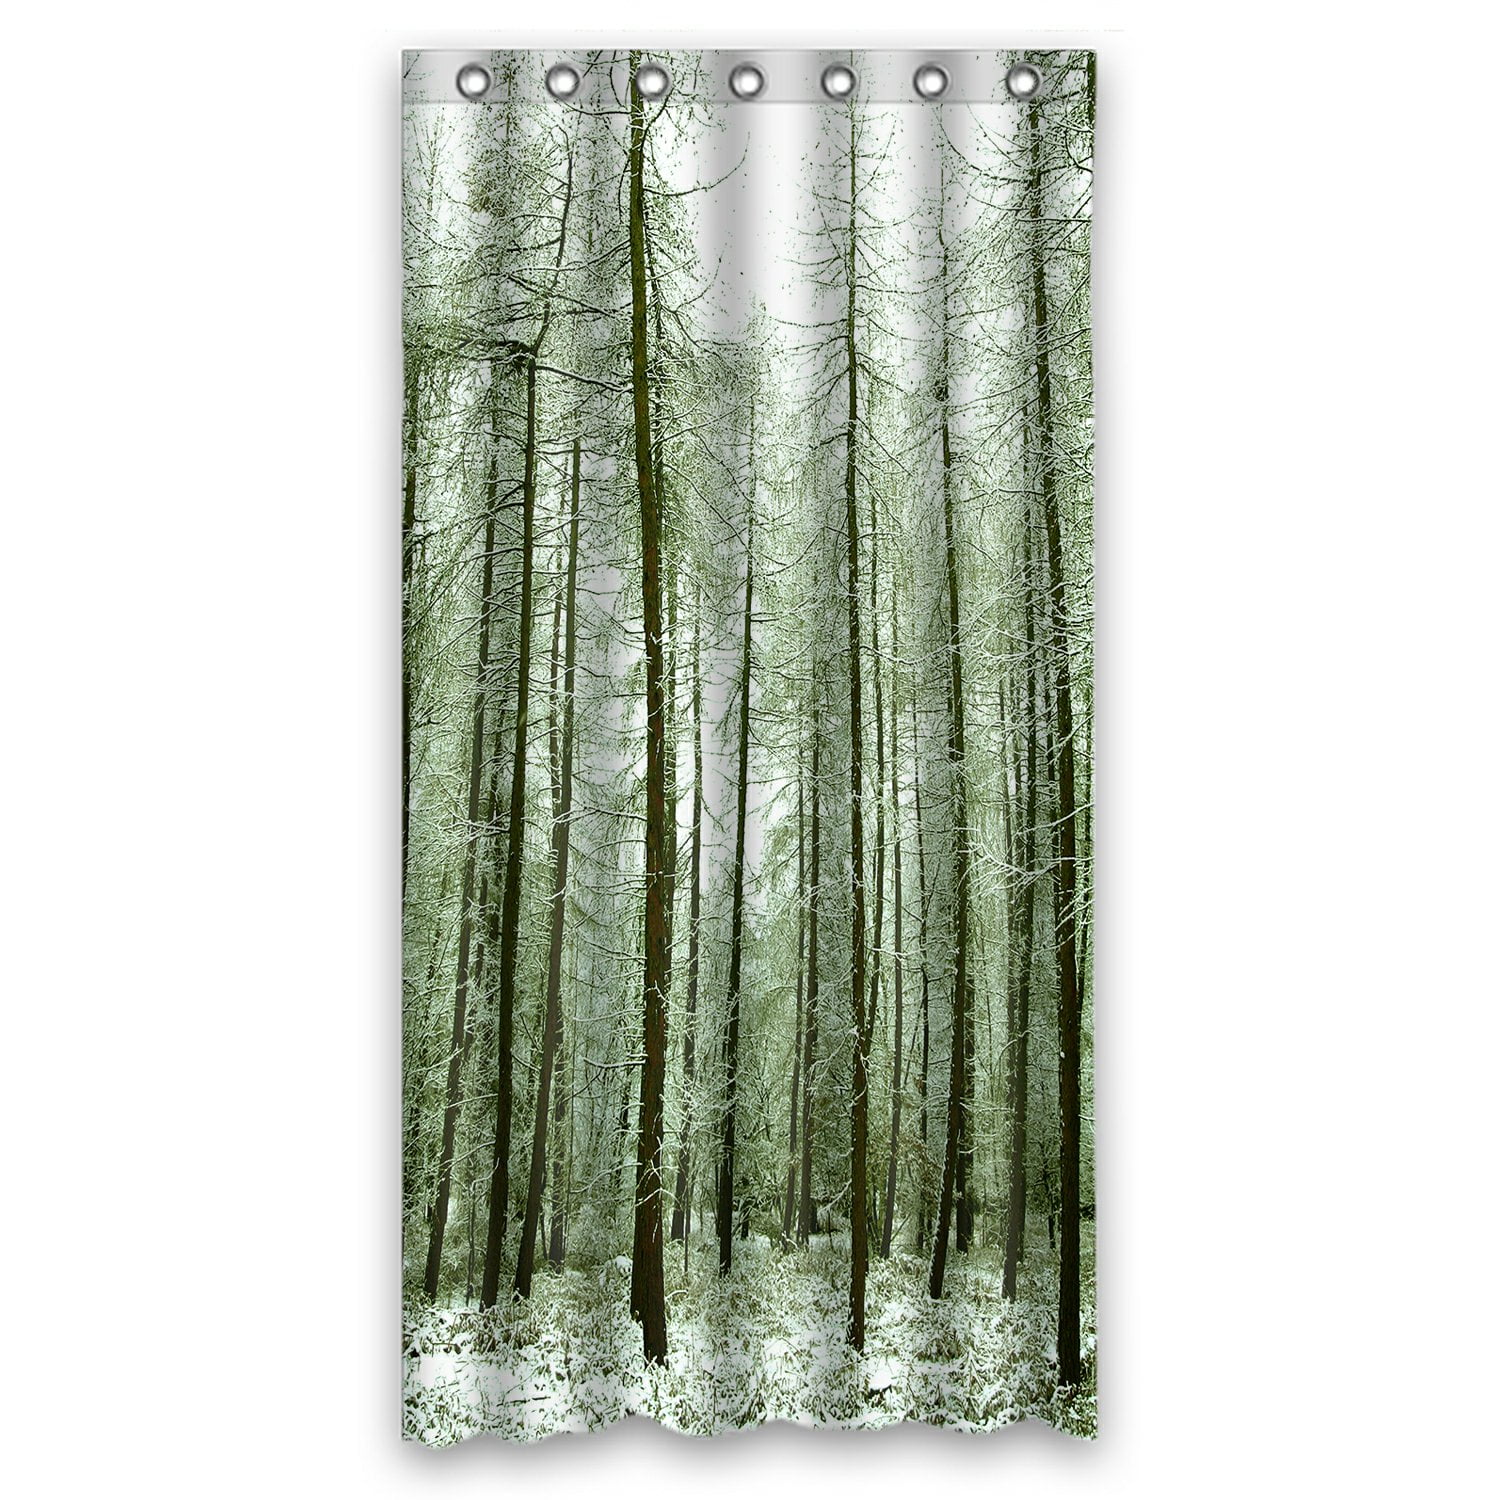 PHFZK Nature Shower Curtain, Winter Scene Snow Tree Trunks Forest ...